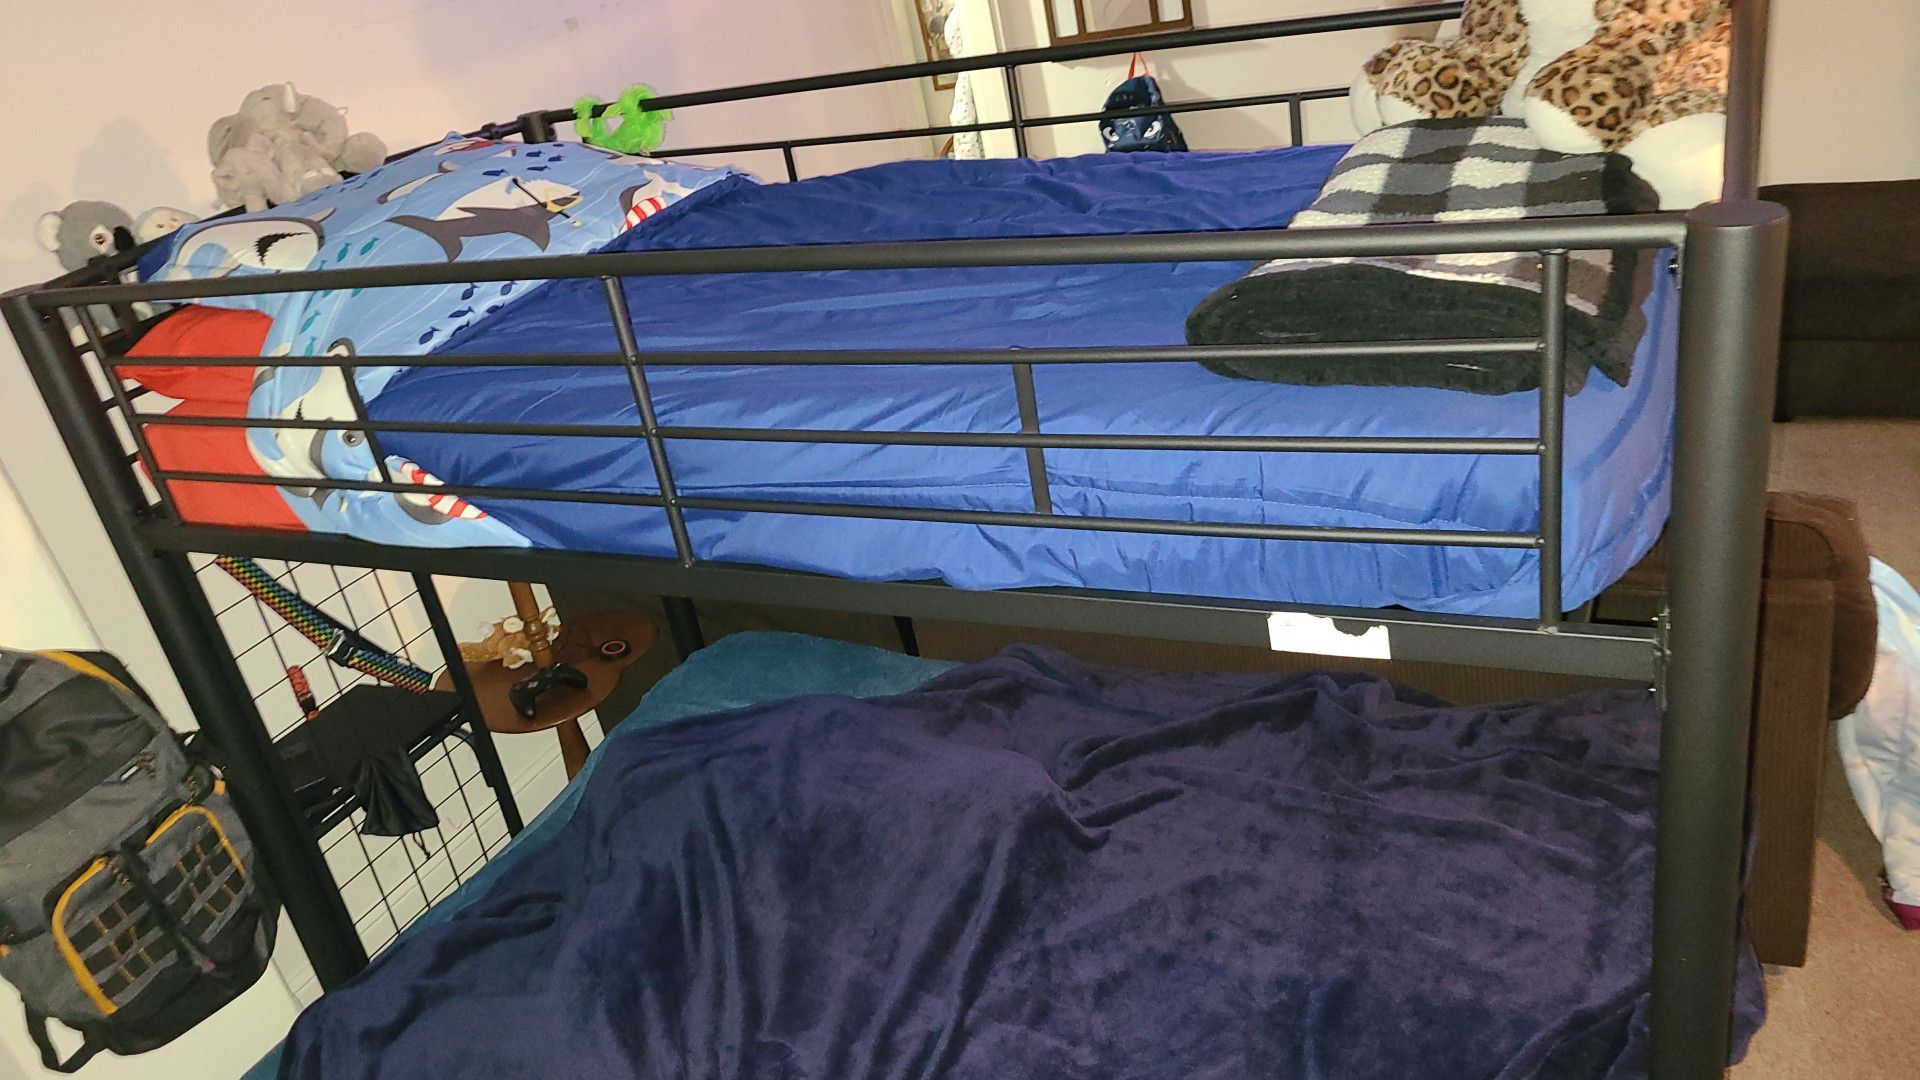 Brand new bunk bed bought it a week ago